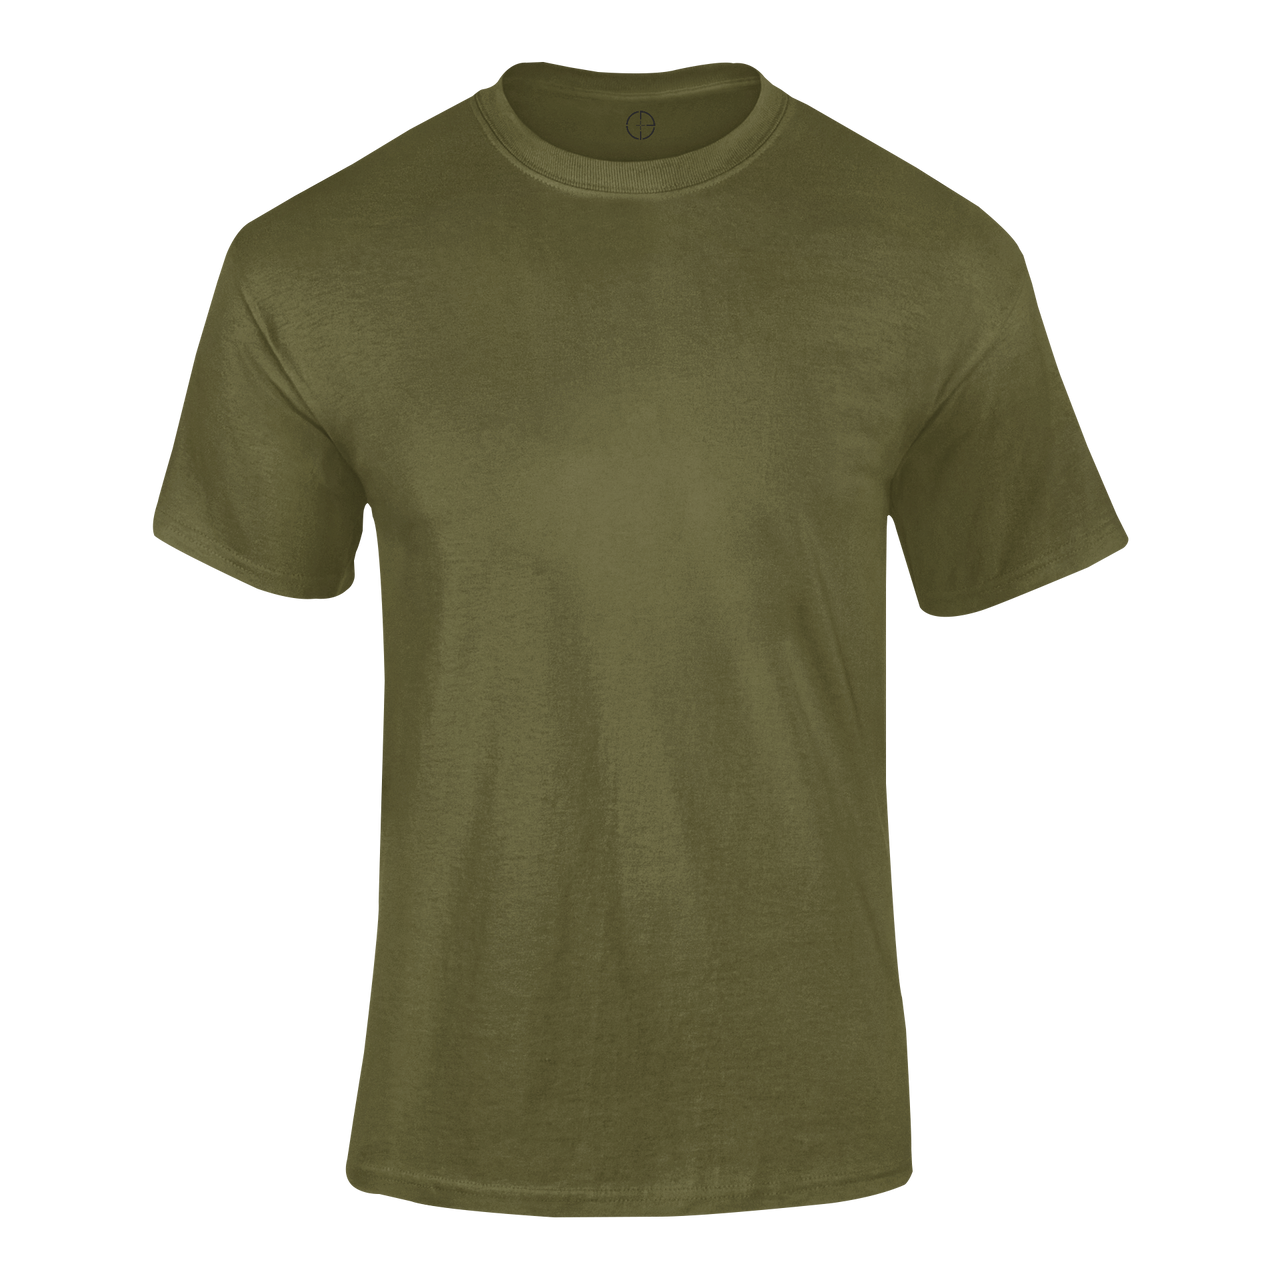 Indian Army Green Belt Plain (Nylon) - Online Army Store